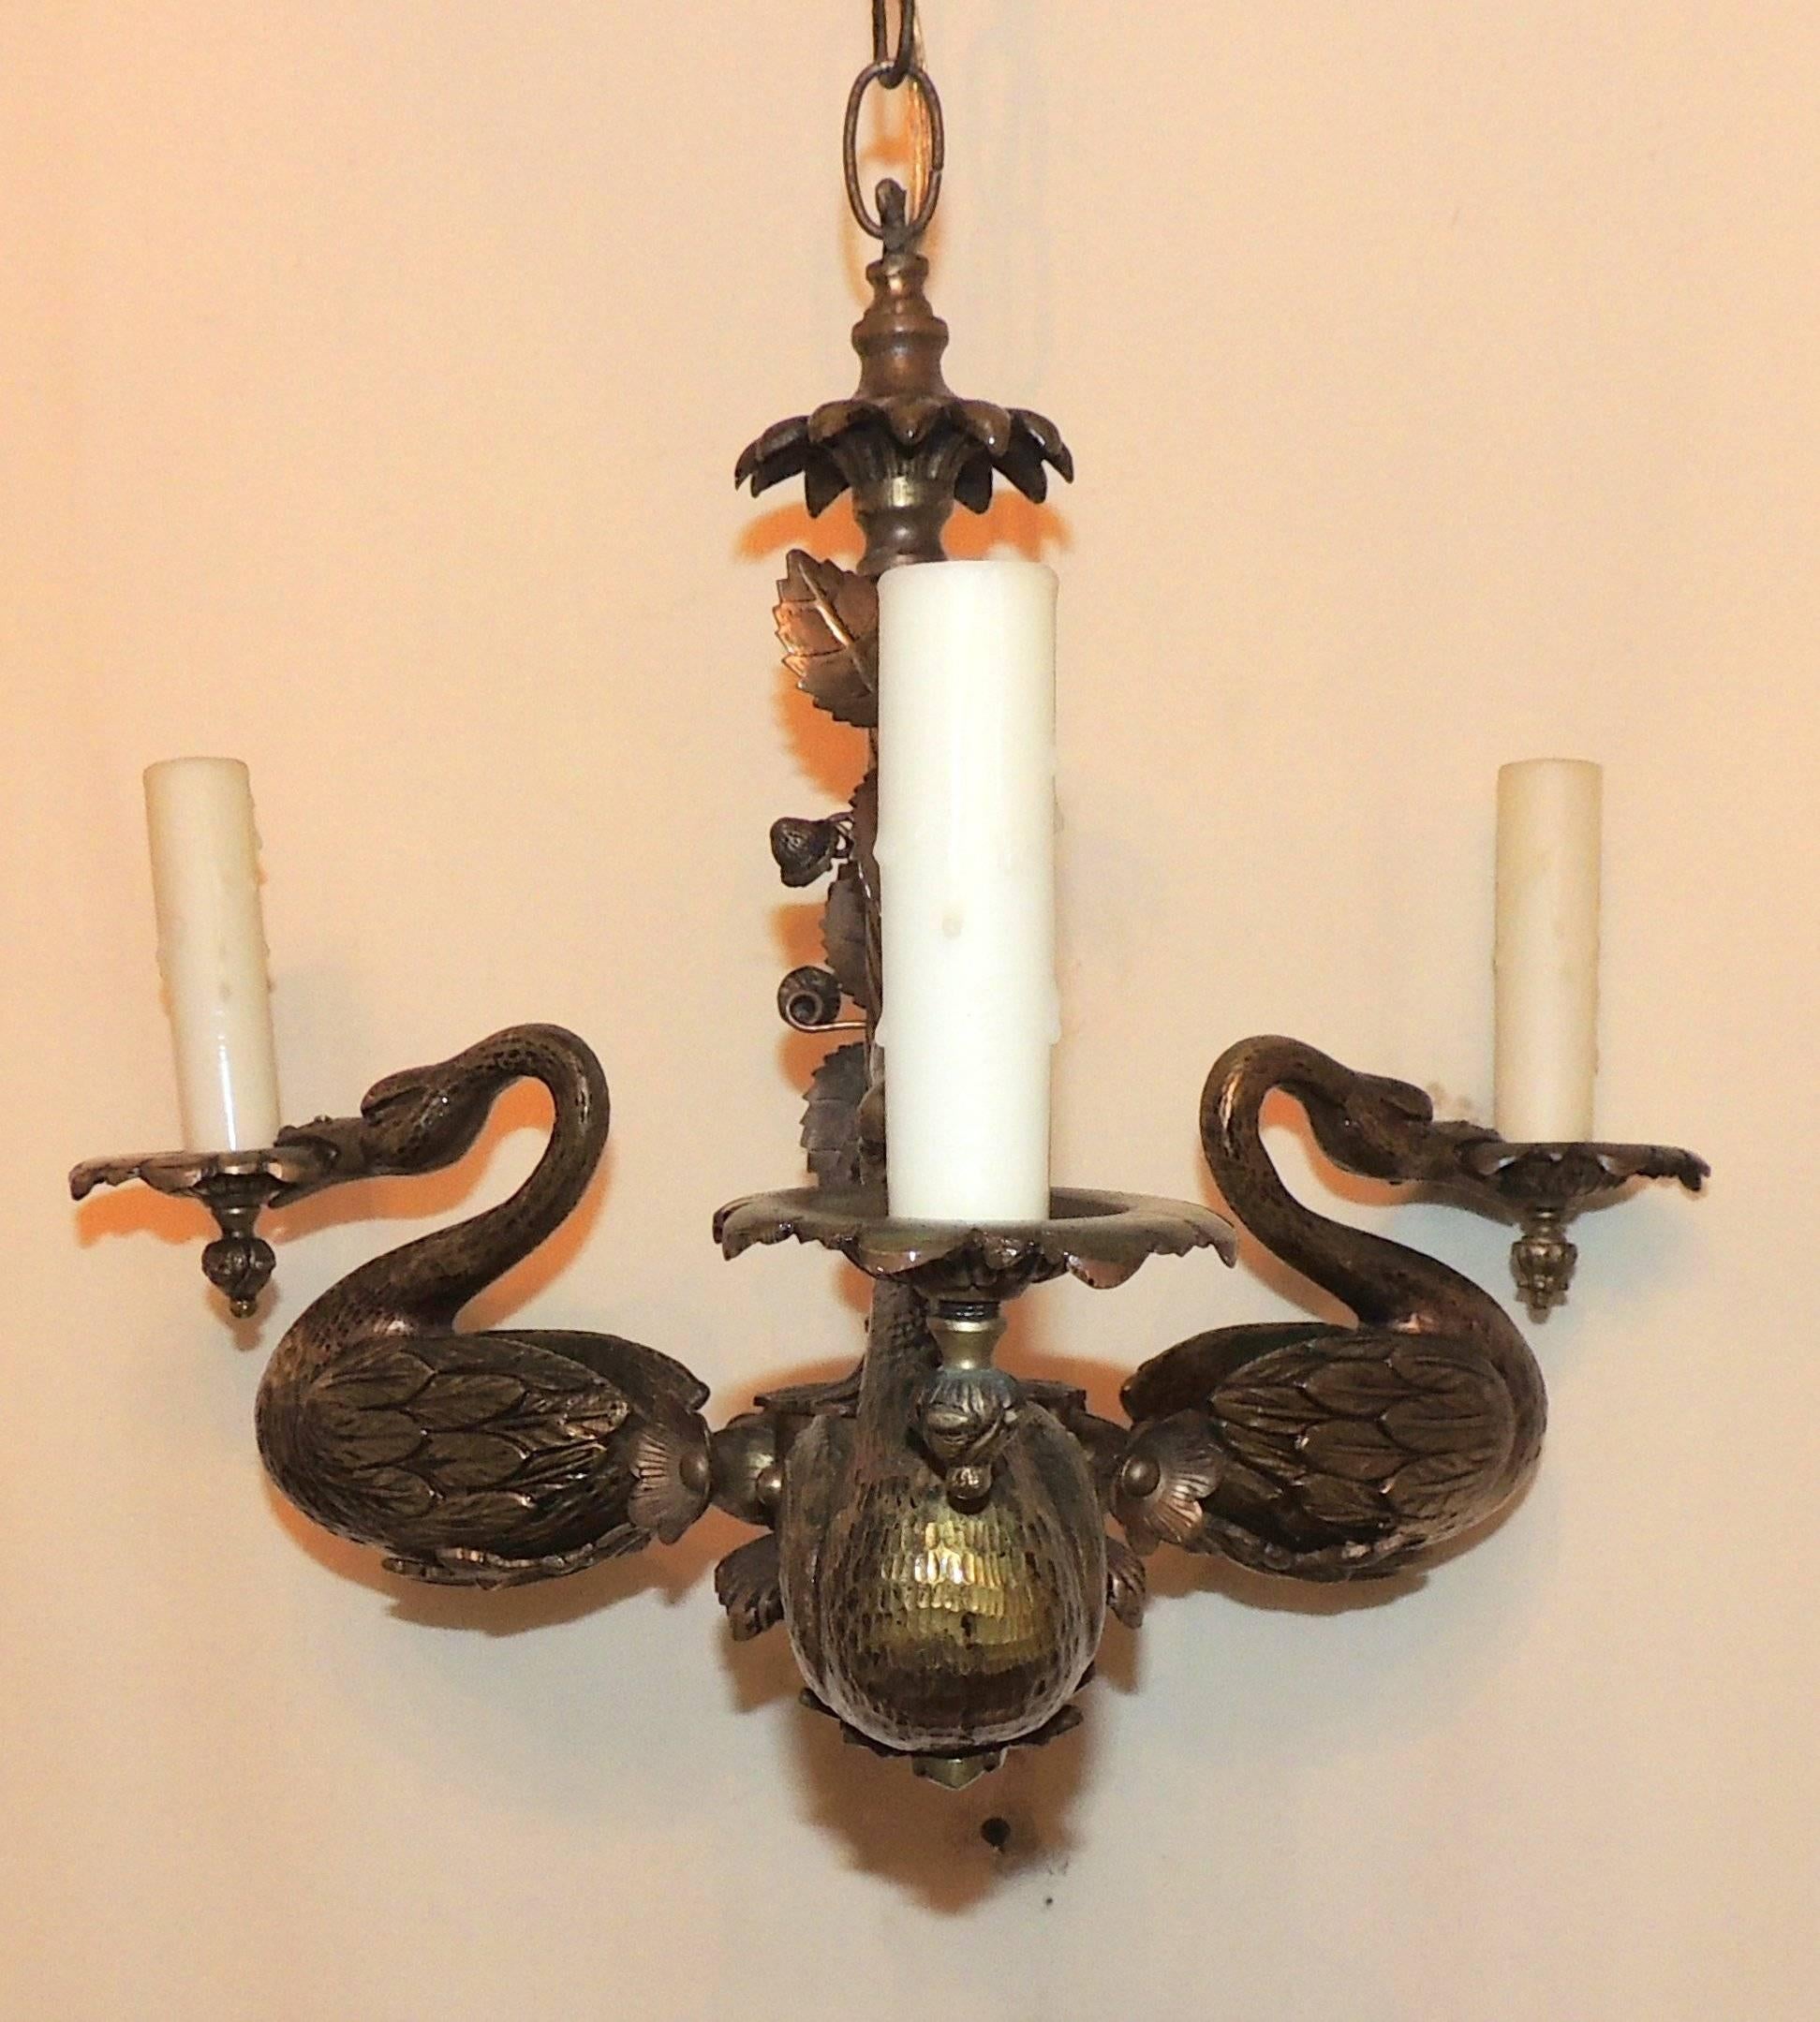 Wonderful three-arm doré bronze swan chandelier, beautifully detailed from the column center with filigree leaves, flower accents and the three lovely swans with etched feathers. This chandelier has a wonderful dark aged patina. The accent pictures